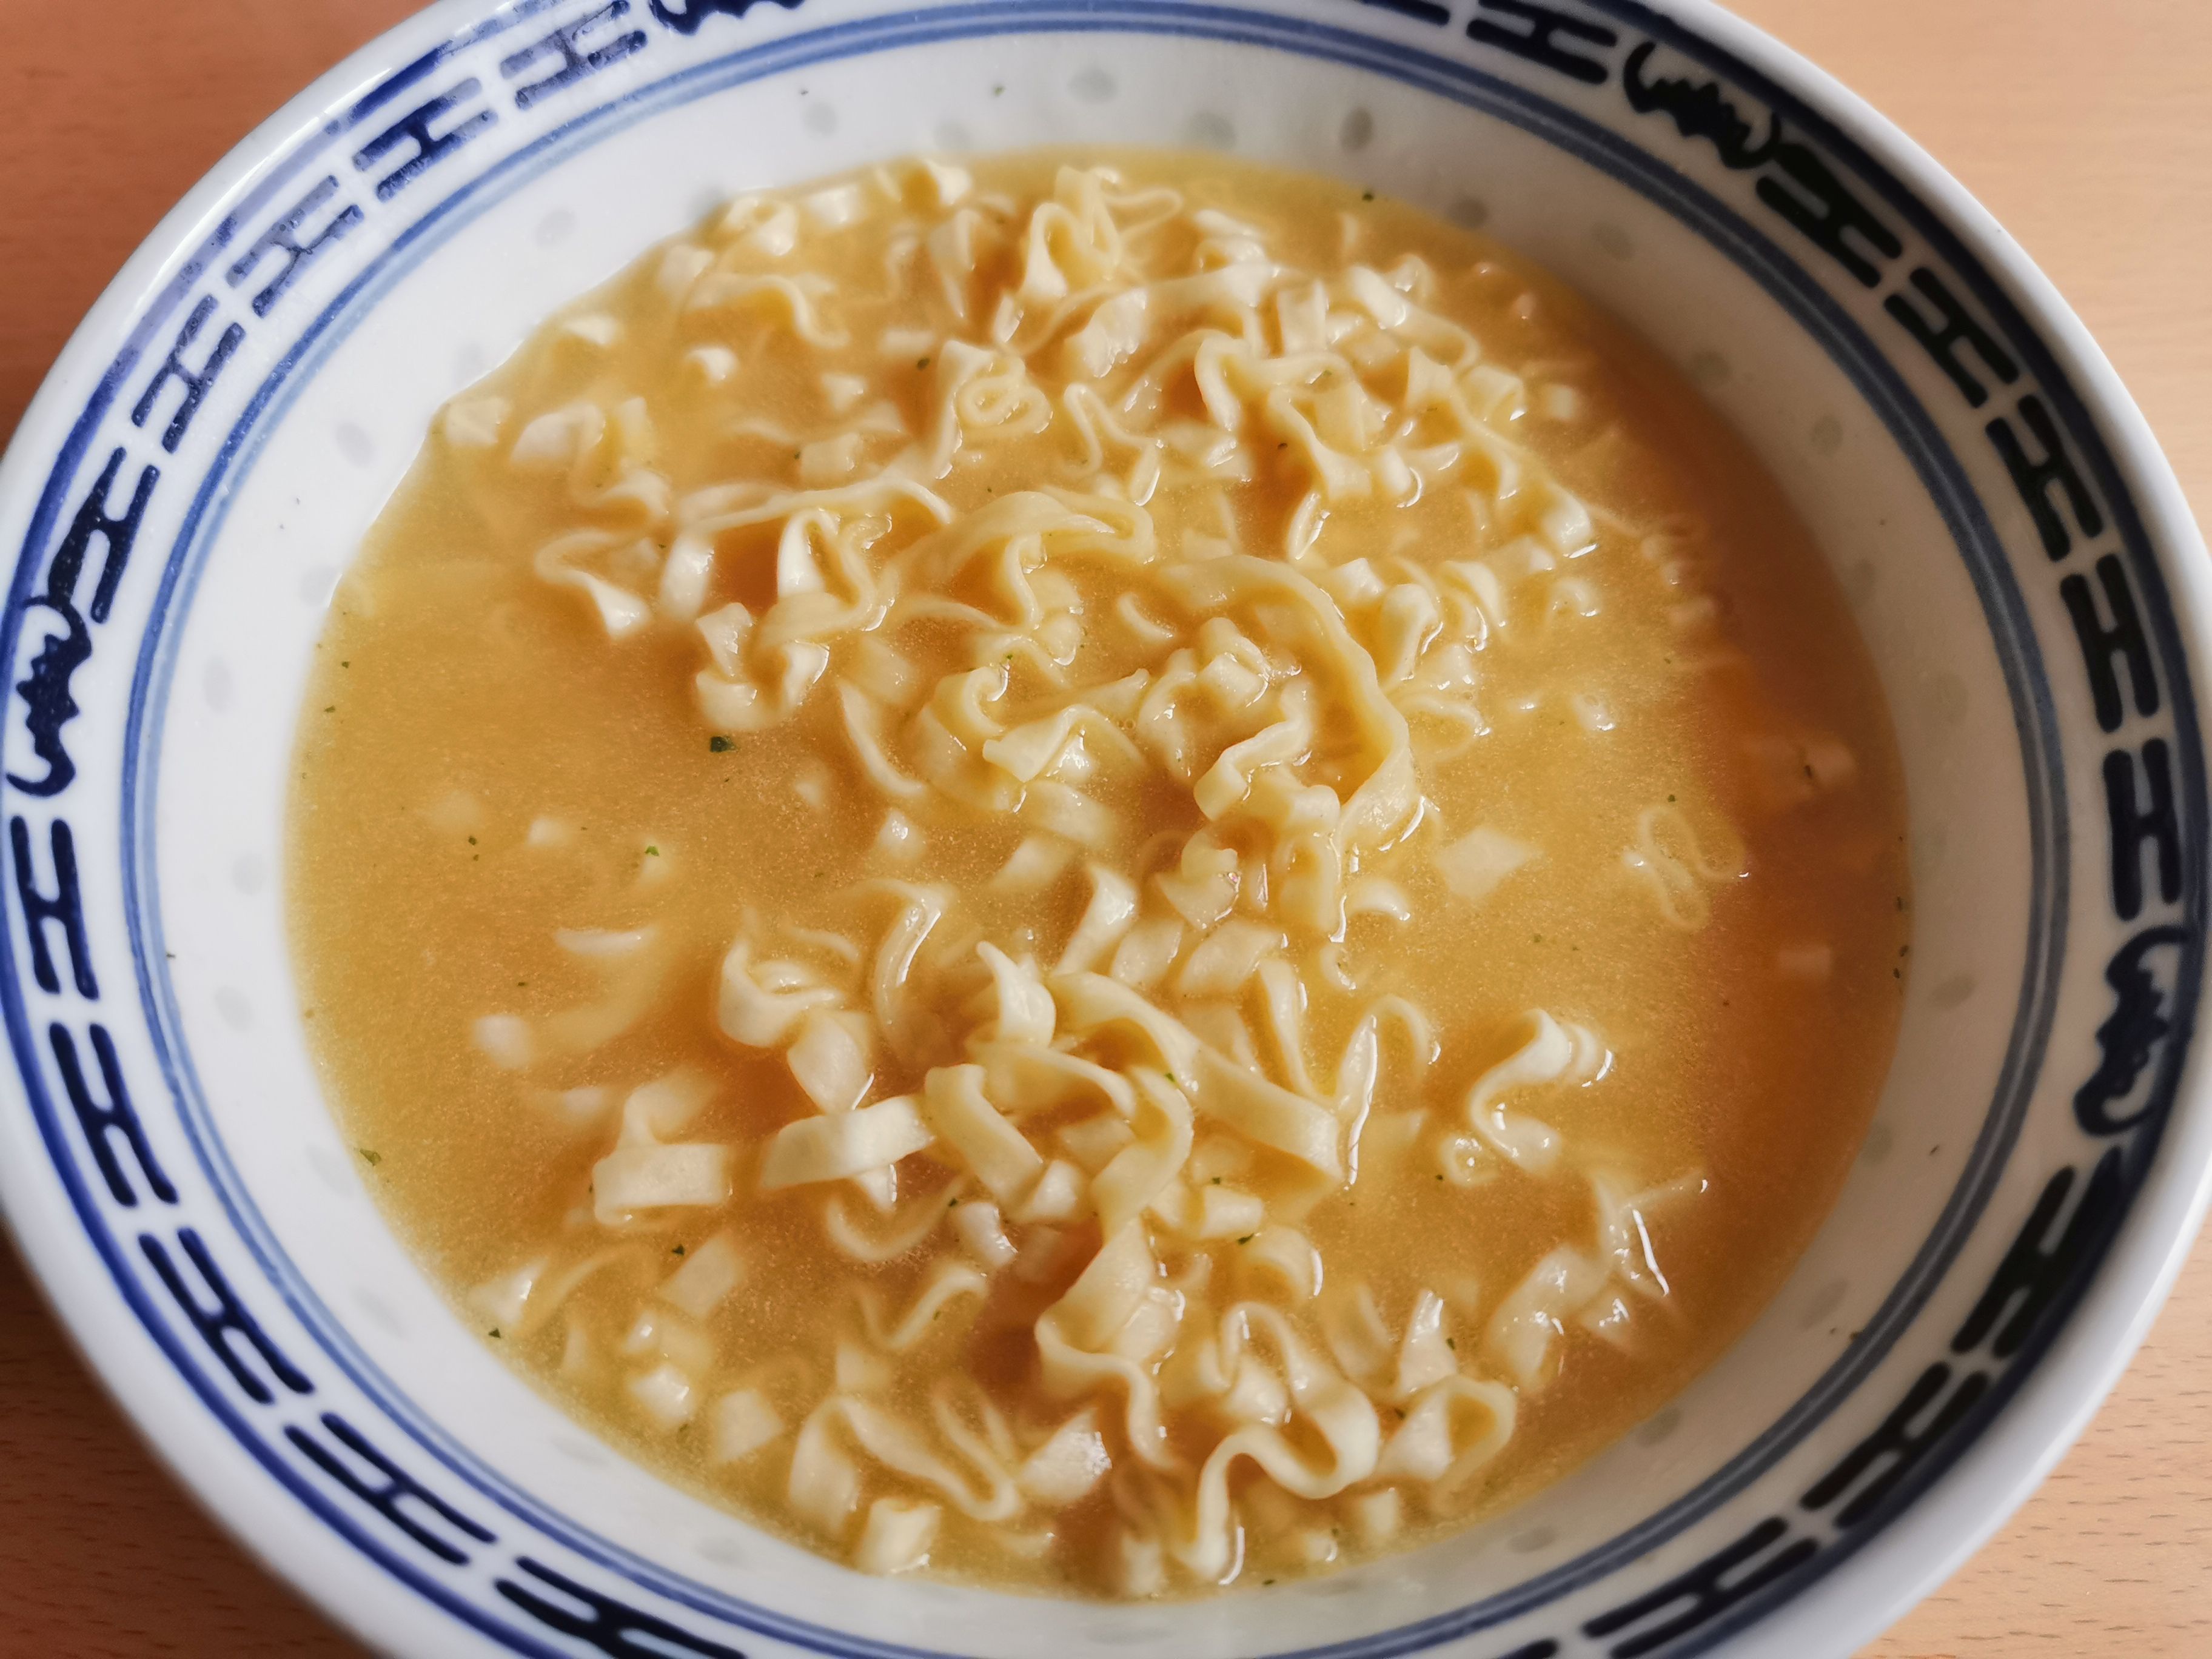 #2186: Maruchan "Instant Lunch Cheddar Cheese" Cup